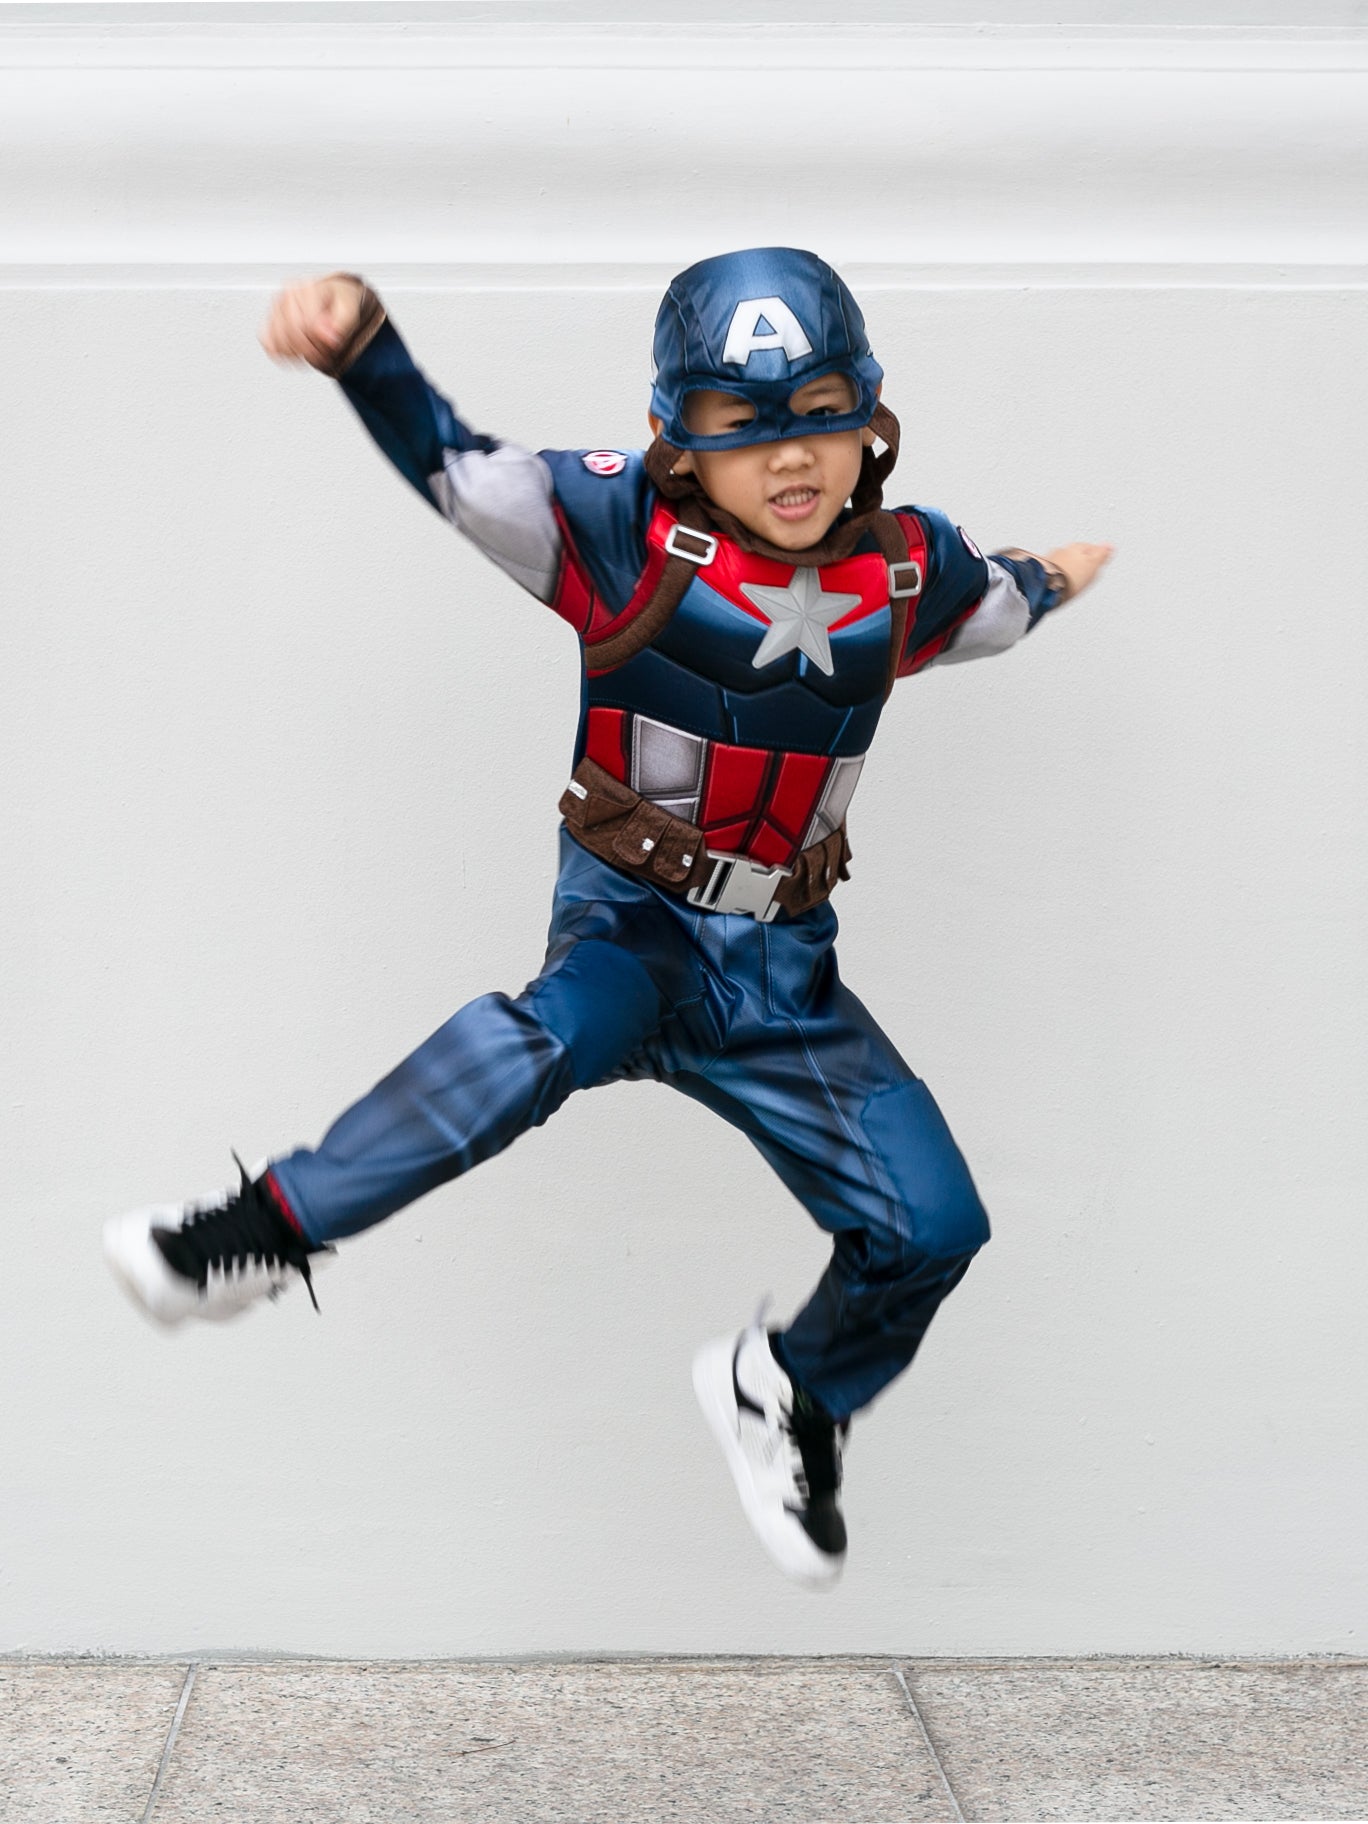 Captain America Costumes for Adults & Kids 